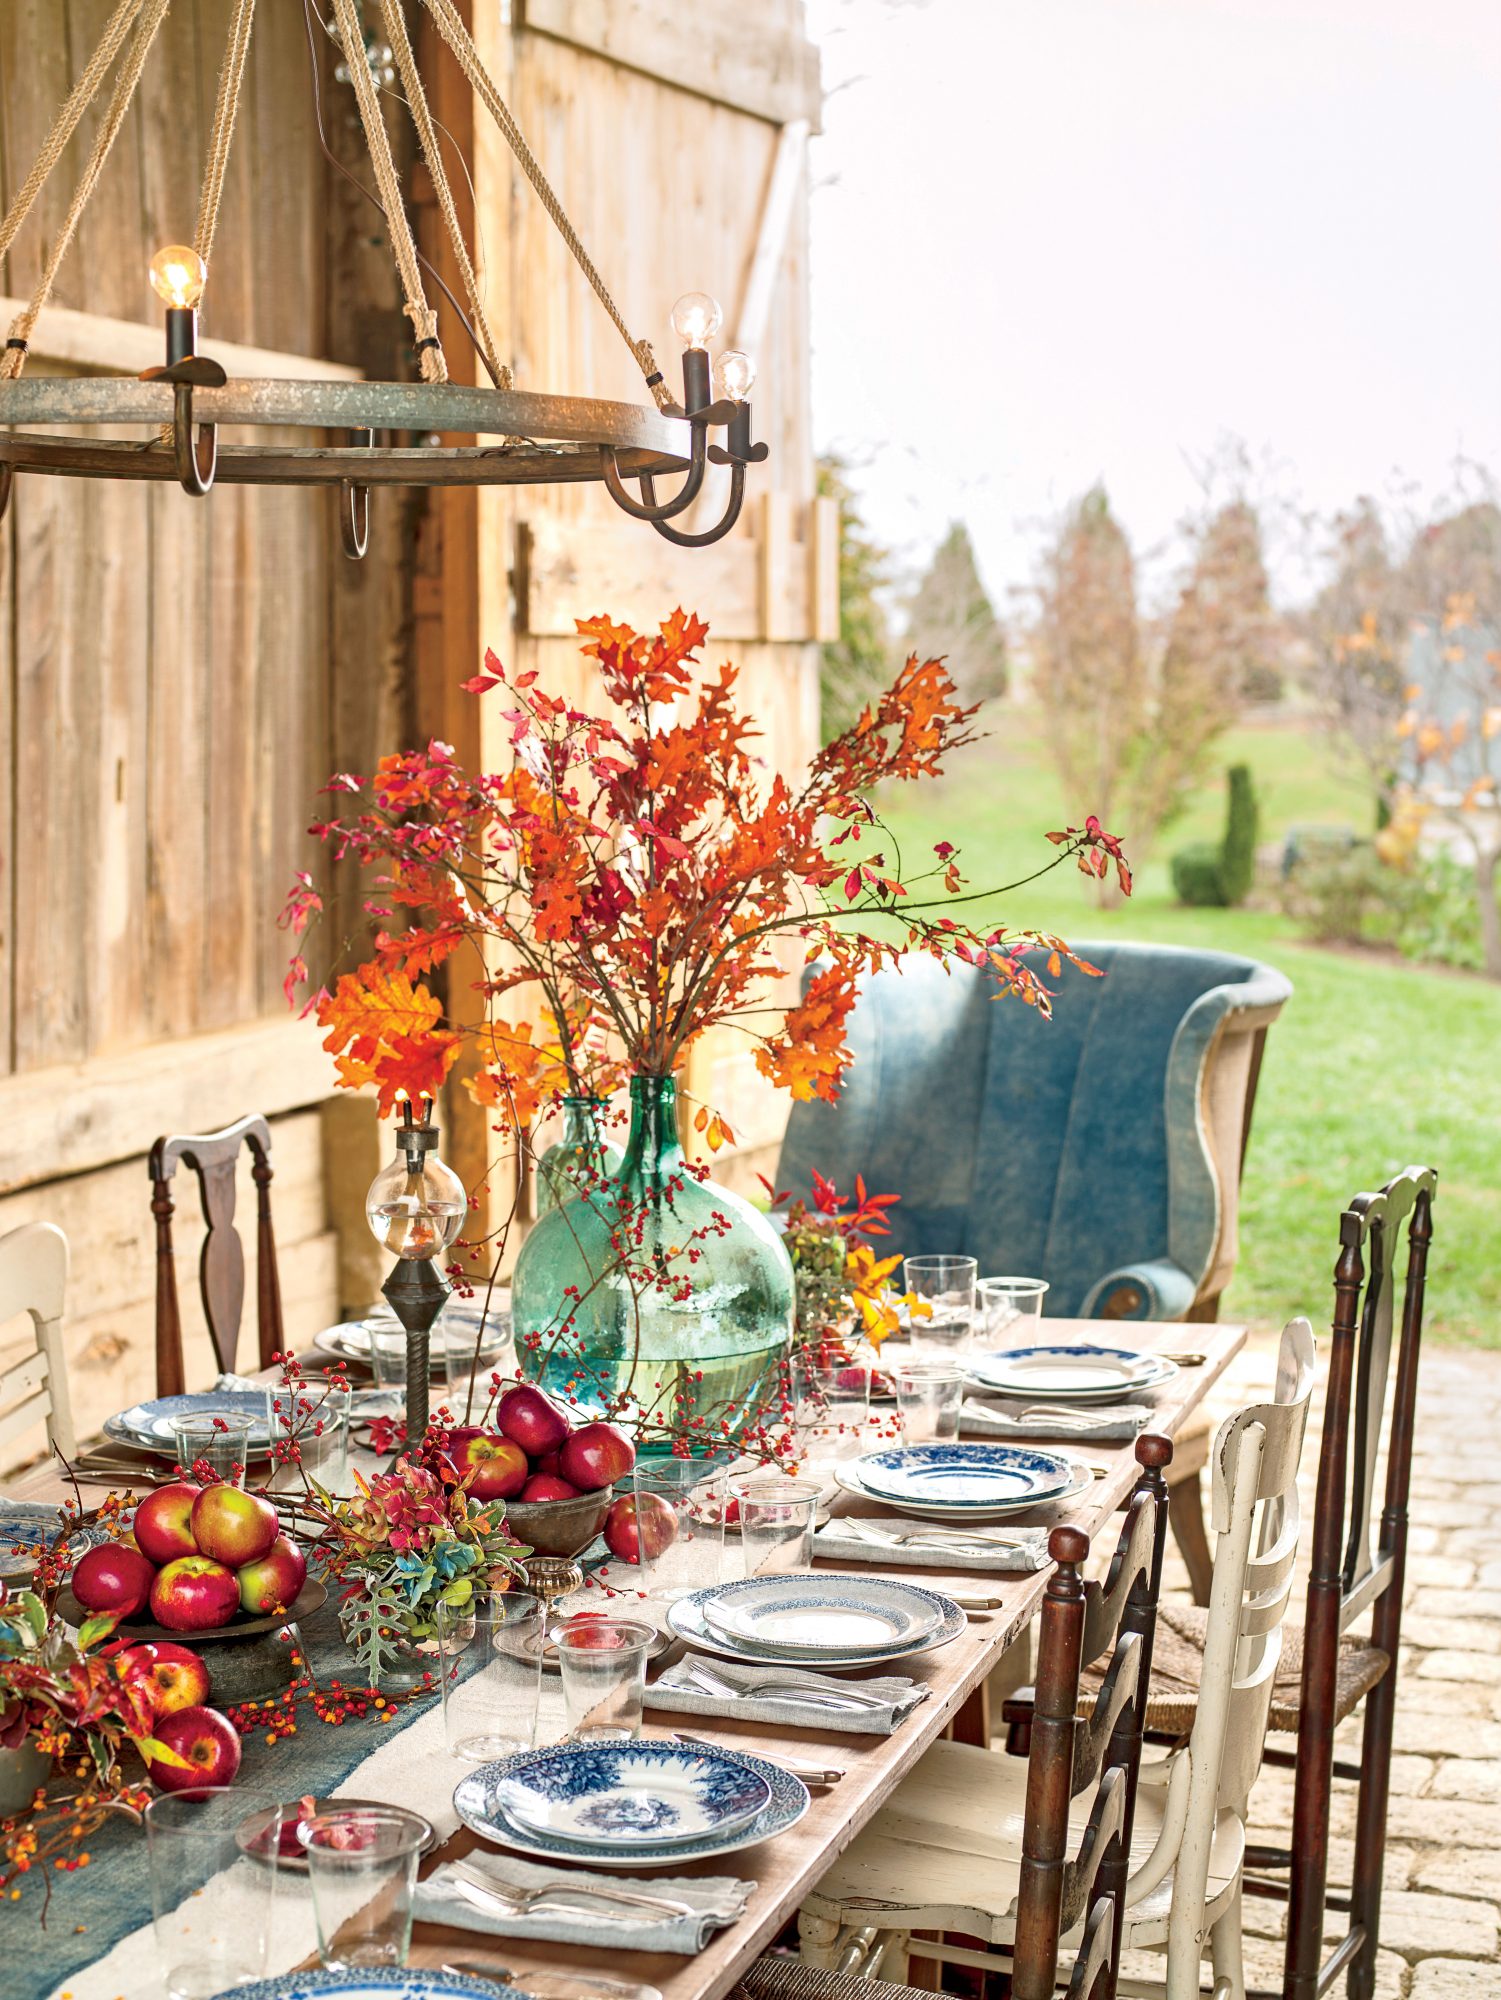 18 Rosh Hashanah Table Decorations to Get You Inspired for This Year’s